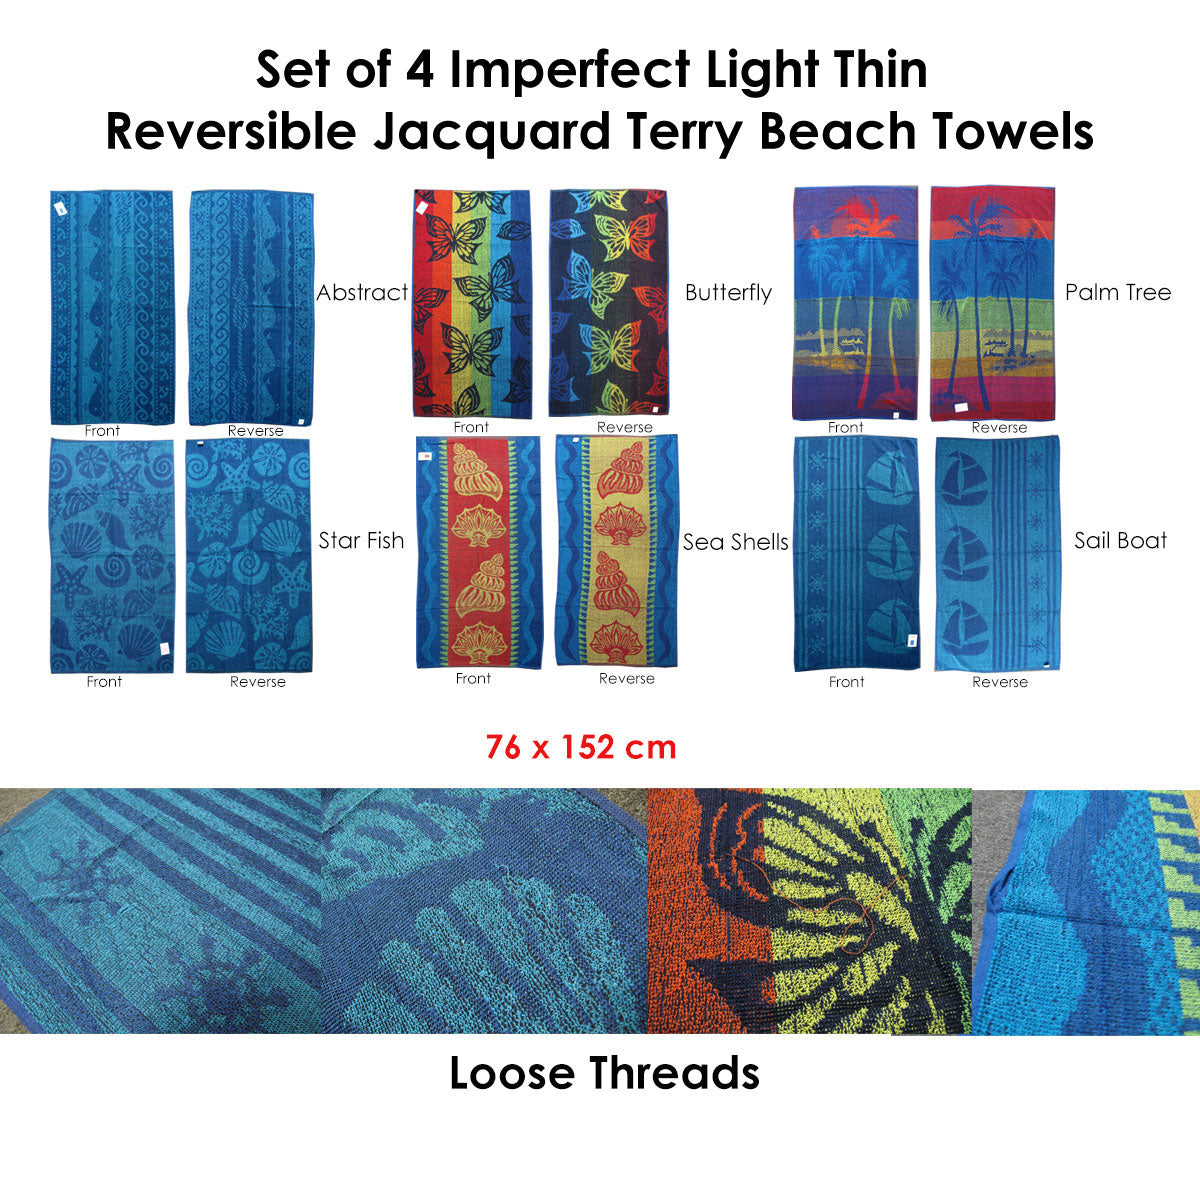 Set of 4 Imperfect Jacquard Terry Beach Towels Sea Shells